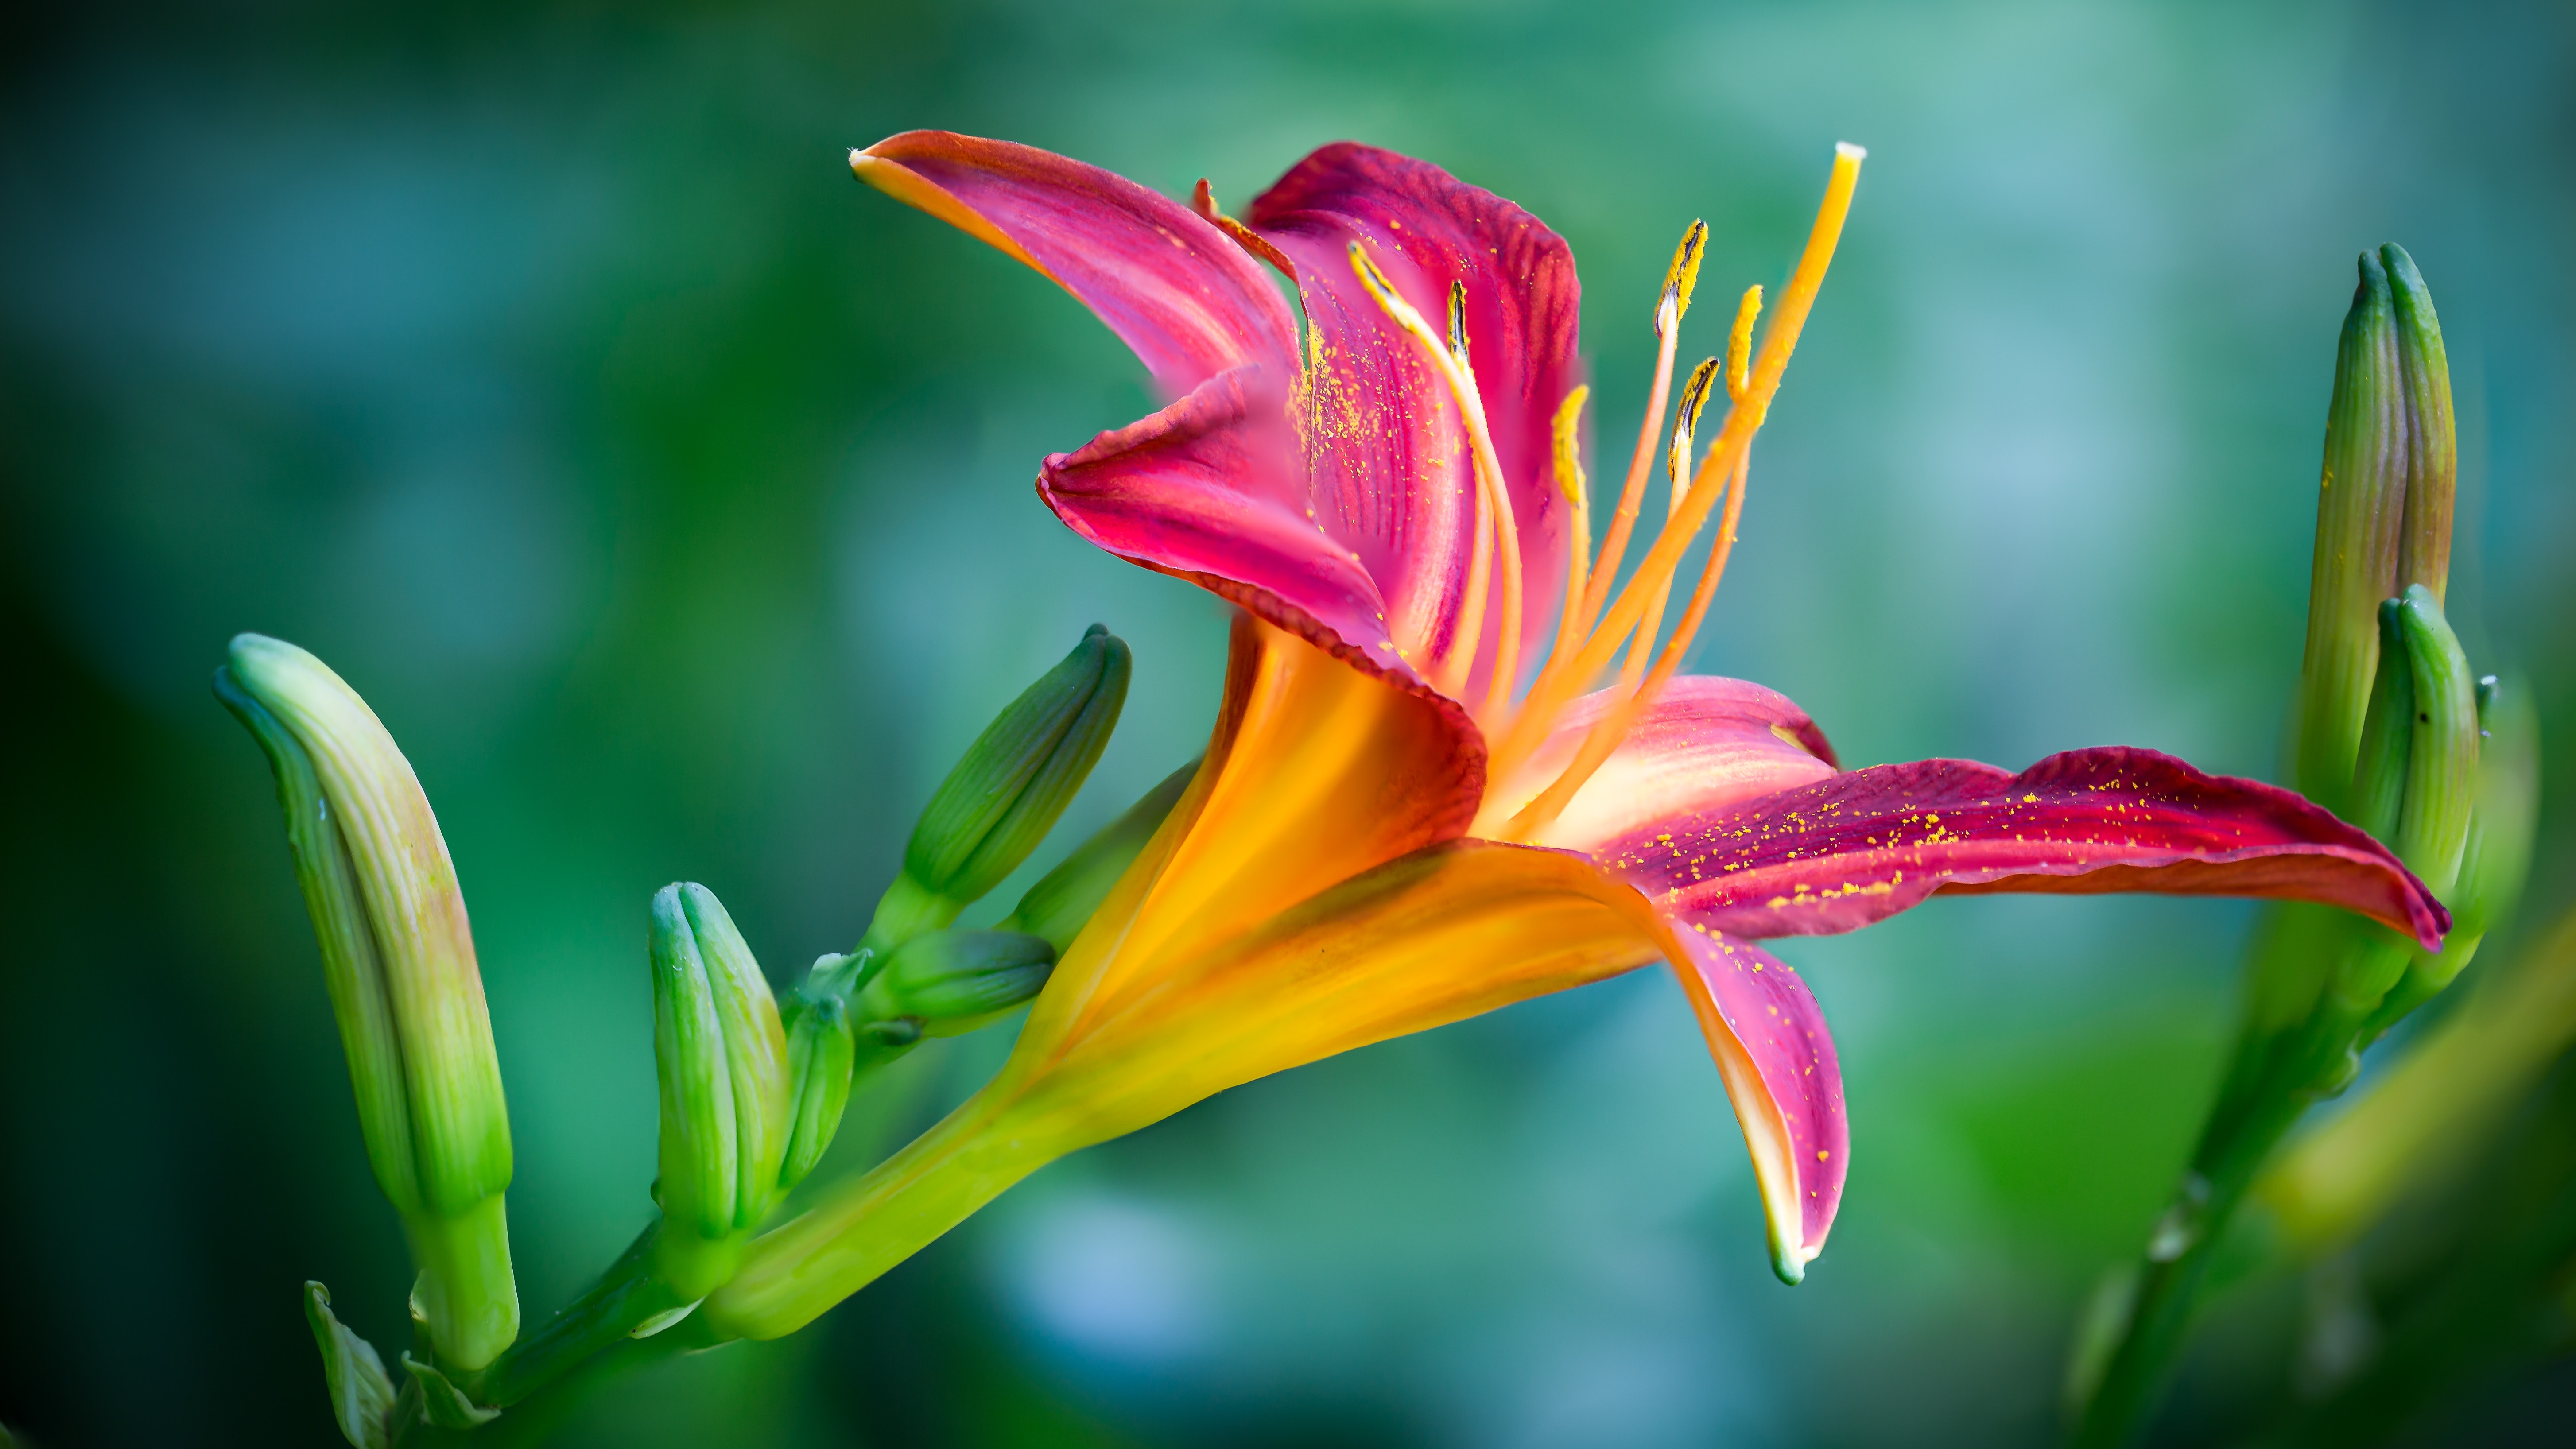 Neon Lily Beautiful Flowers Pictures Desktop Hd Wallpapers For